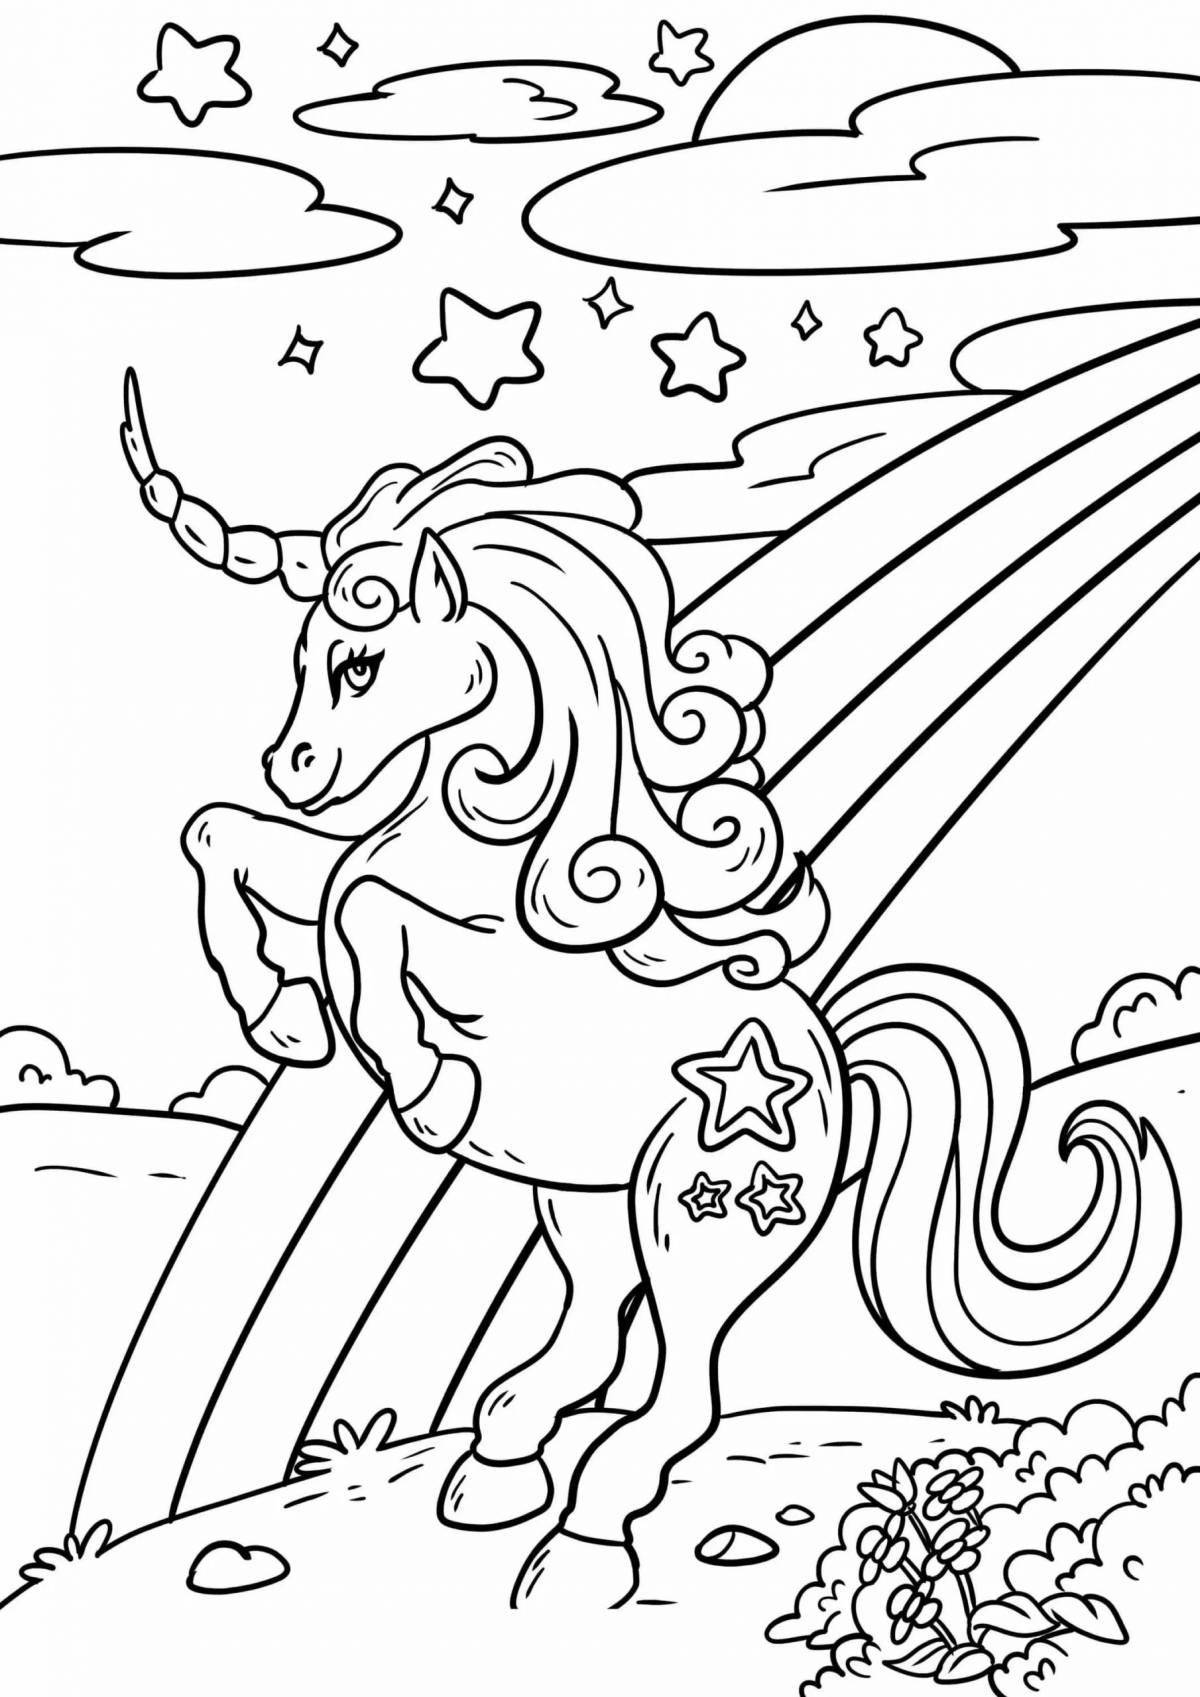 Fun coloring pages with unicorns